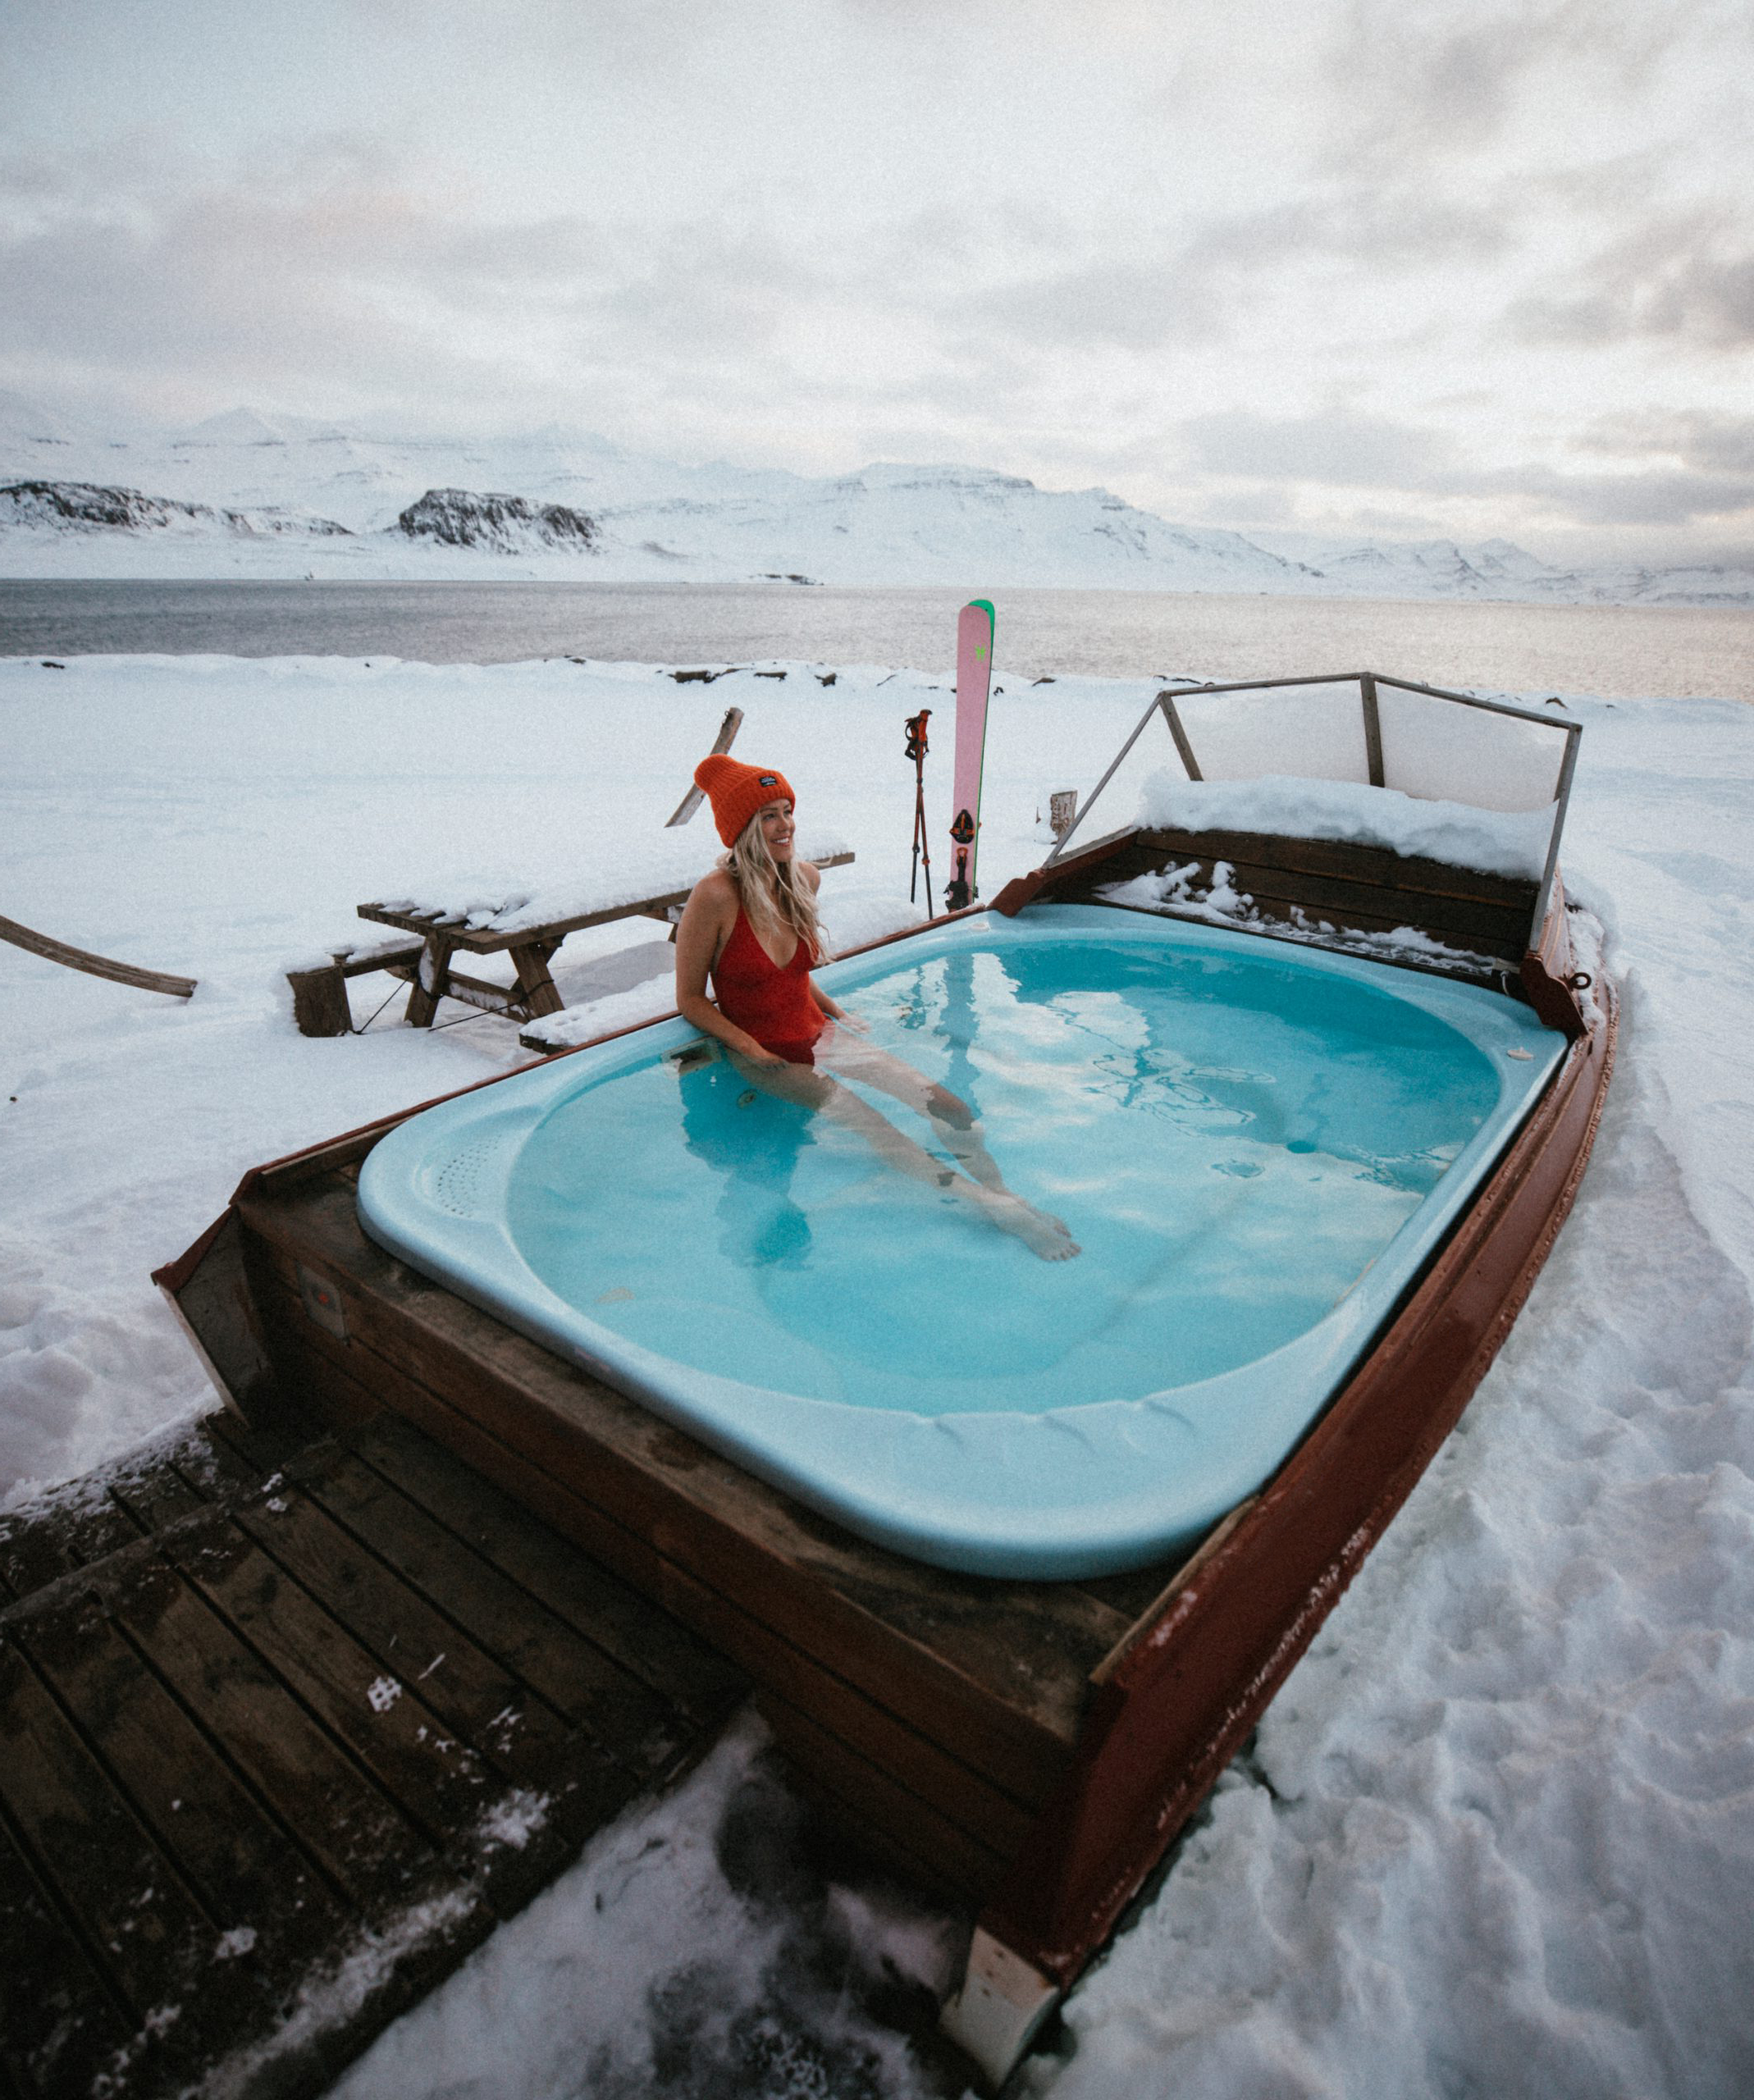 Asa in a hot tub in Iceland with her skis in the background